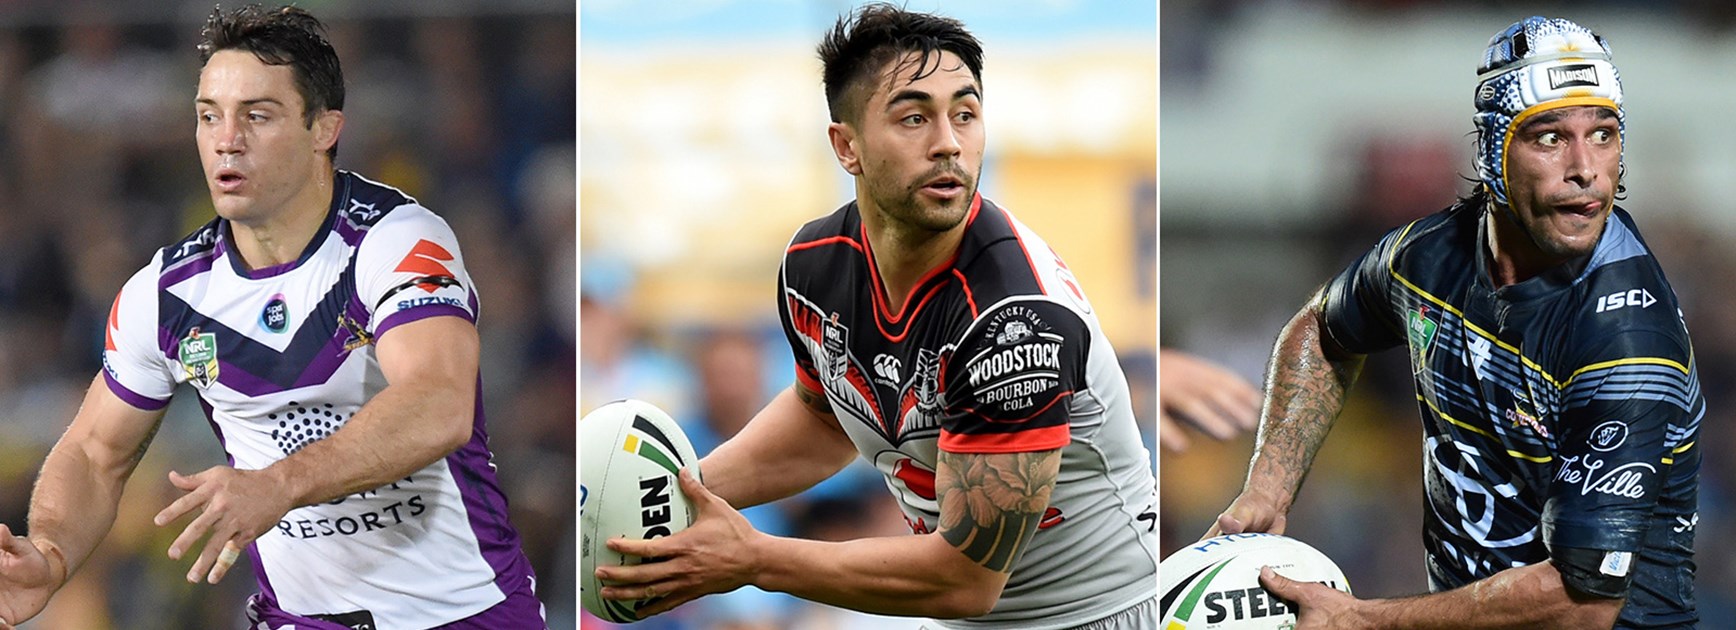 Cooper Cronk, Shaun Johnson and Johnathan Thurston all earned their place in NRL.com's top 10.